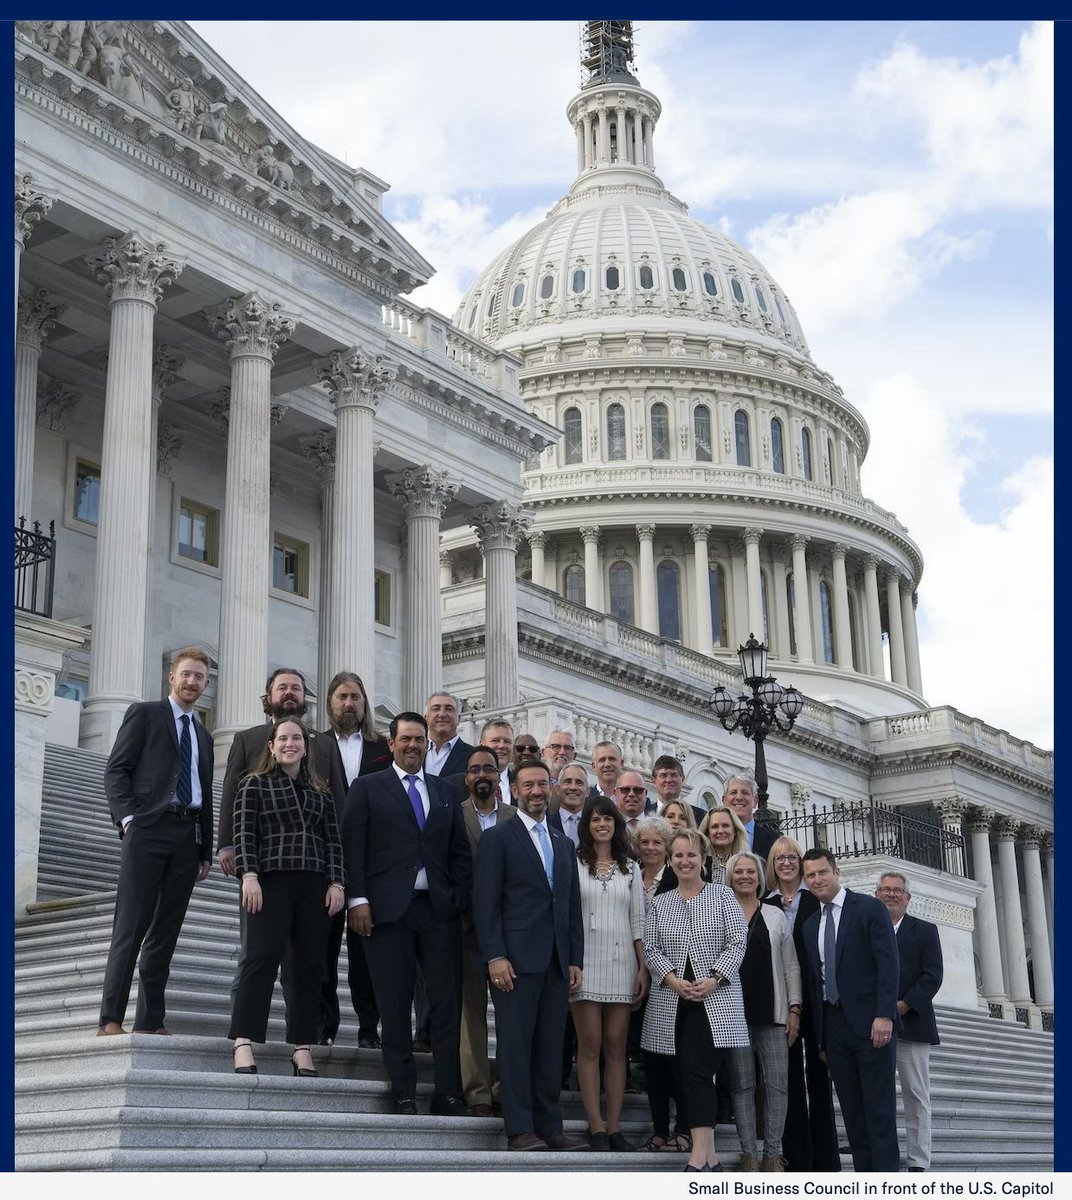 So grateful for #SmallBiz owners who take time to SPEAK OUT on the importance of jobs, innovation, community, and growth.  Blessed to host @uschamber #SmallBizCouncil for our annual meeting and Fly-In  buff.ly/49JIhVG